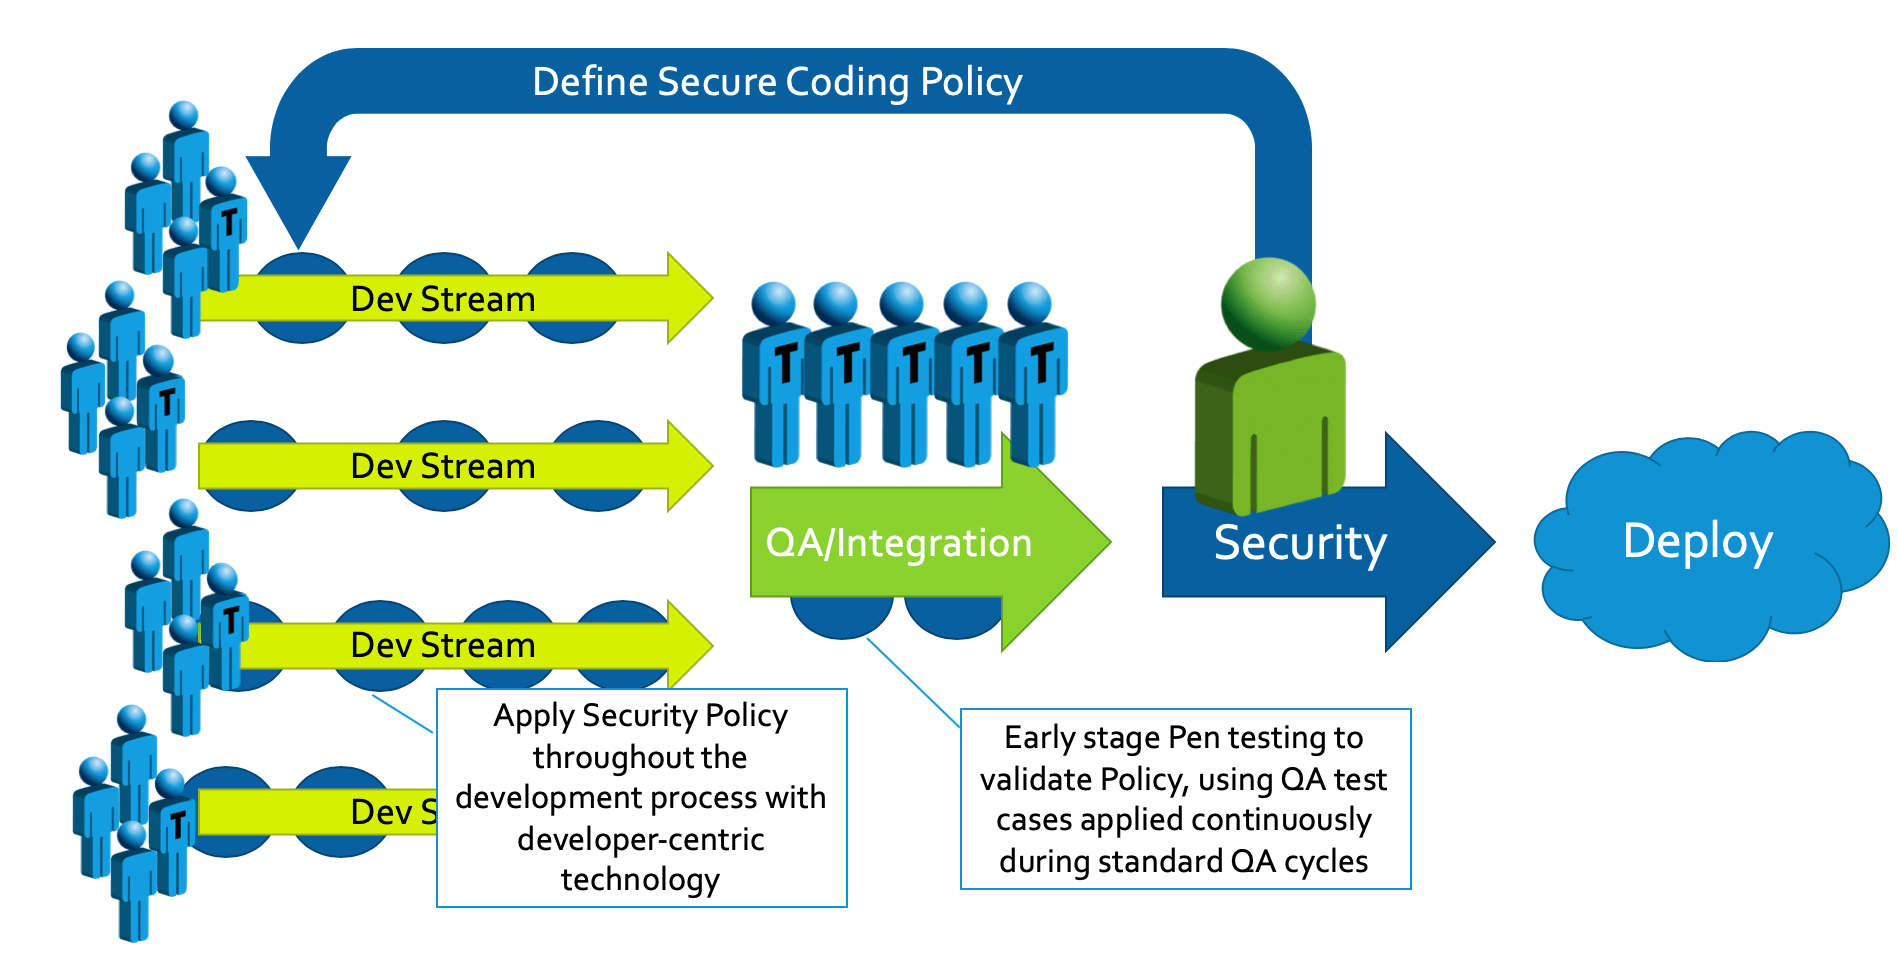 Workflow graphic showing how automation enables a shift-left approach to security enabling developers to apply security policies throughout development and QA to validate security policies through penetration testing.